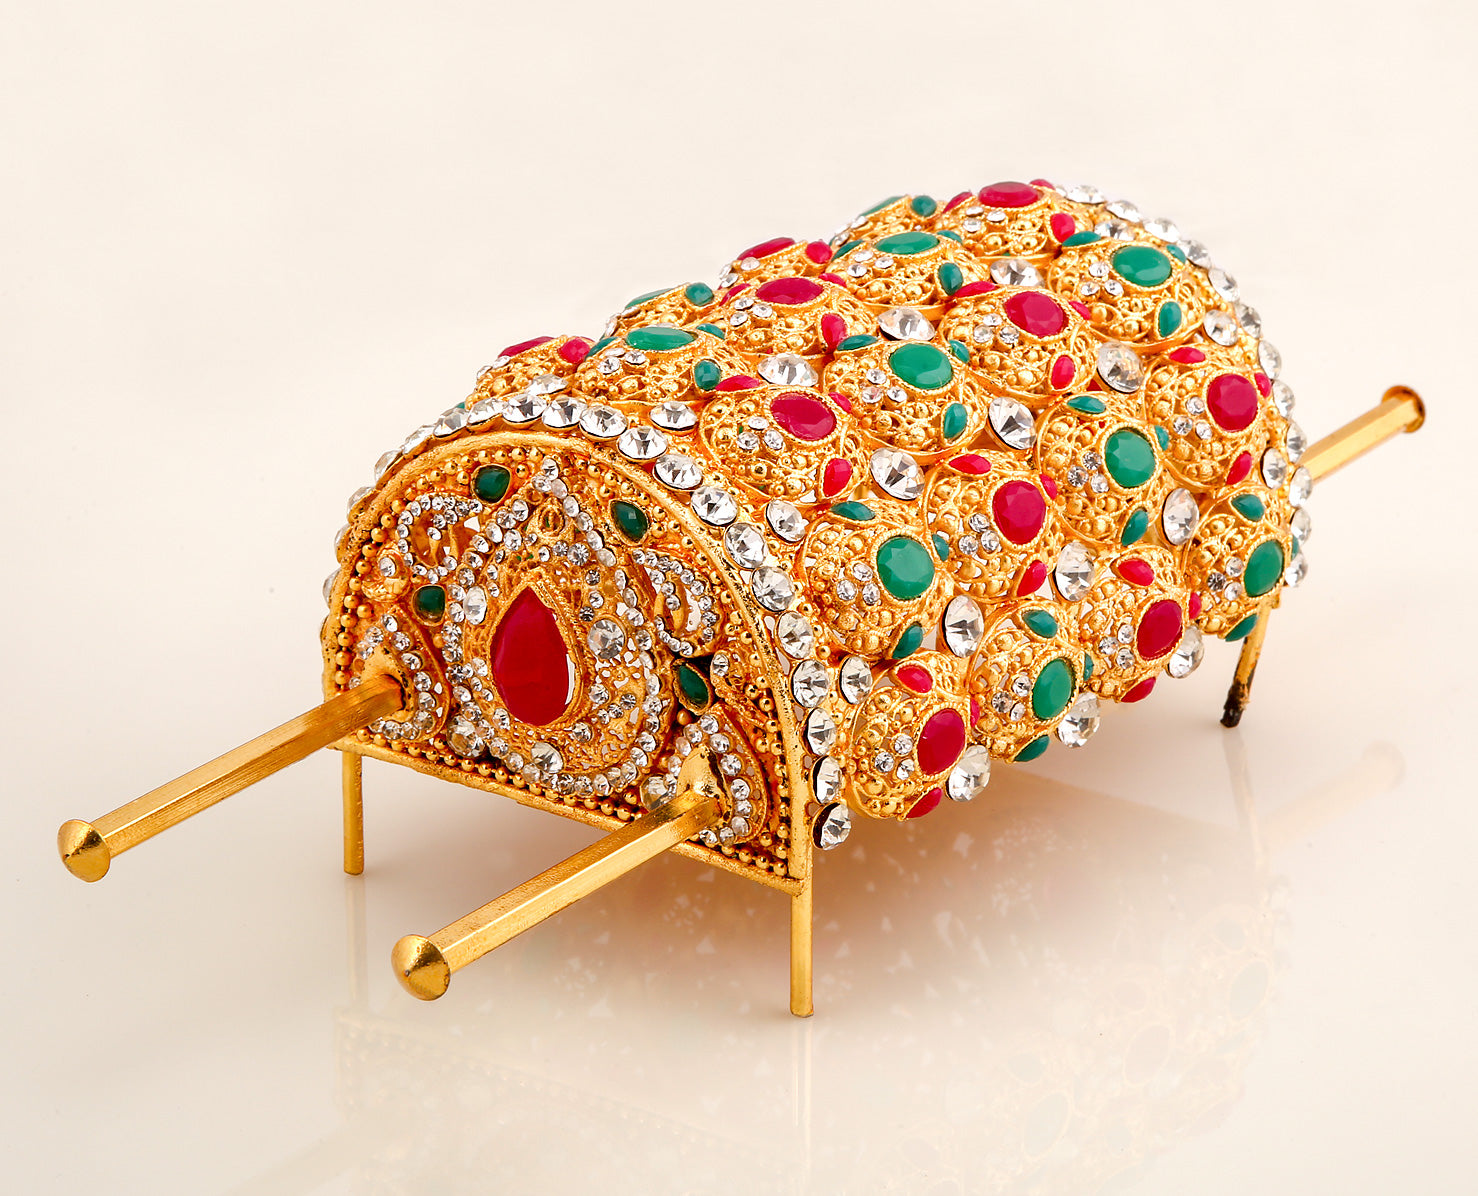 Glorious Golden Taboot with Delicate Small Stone Embellishments for Your Small Home Azakhana